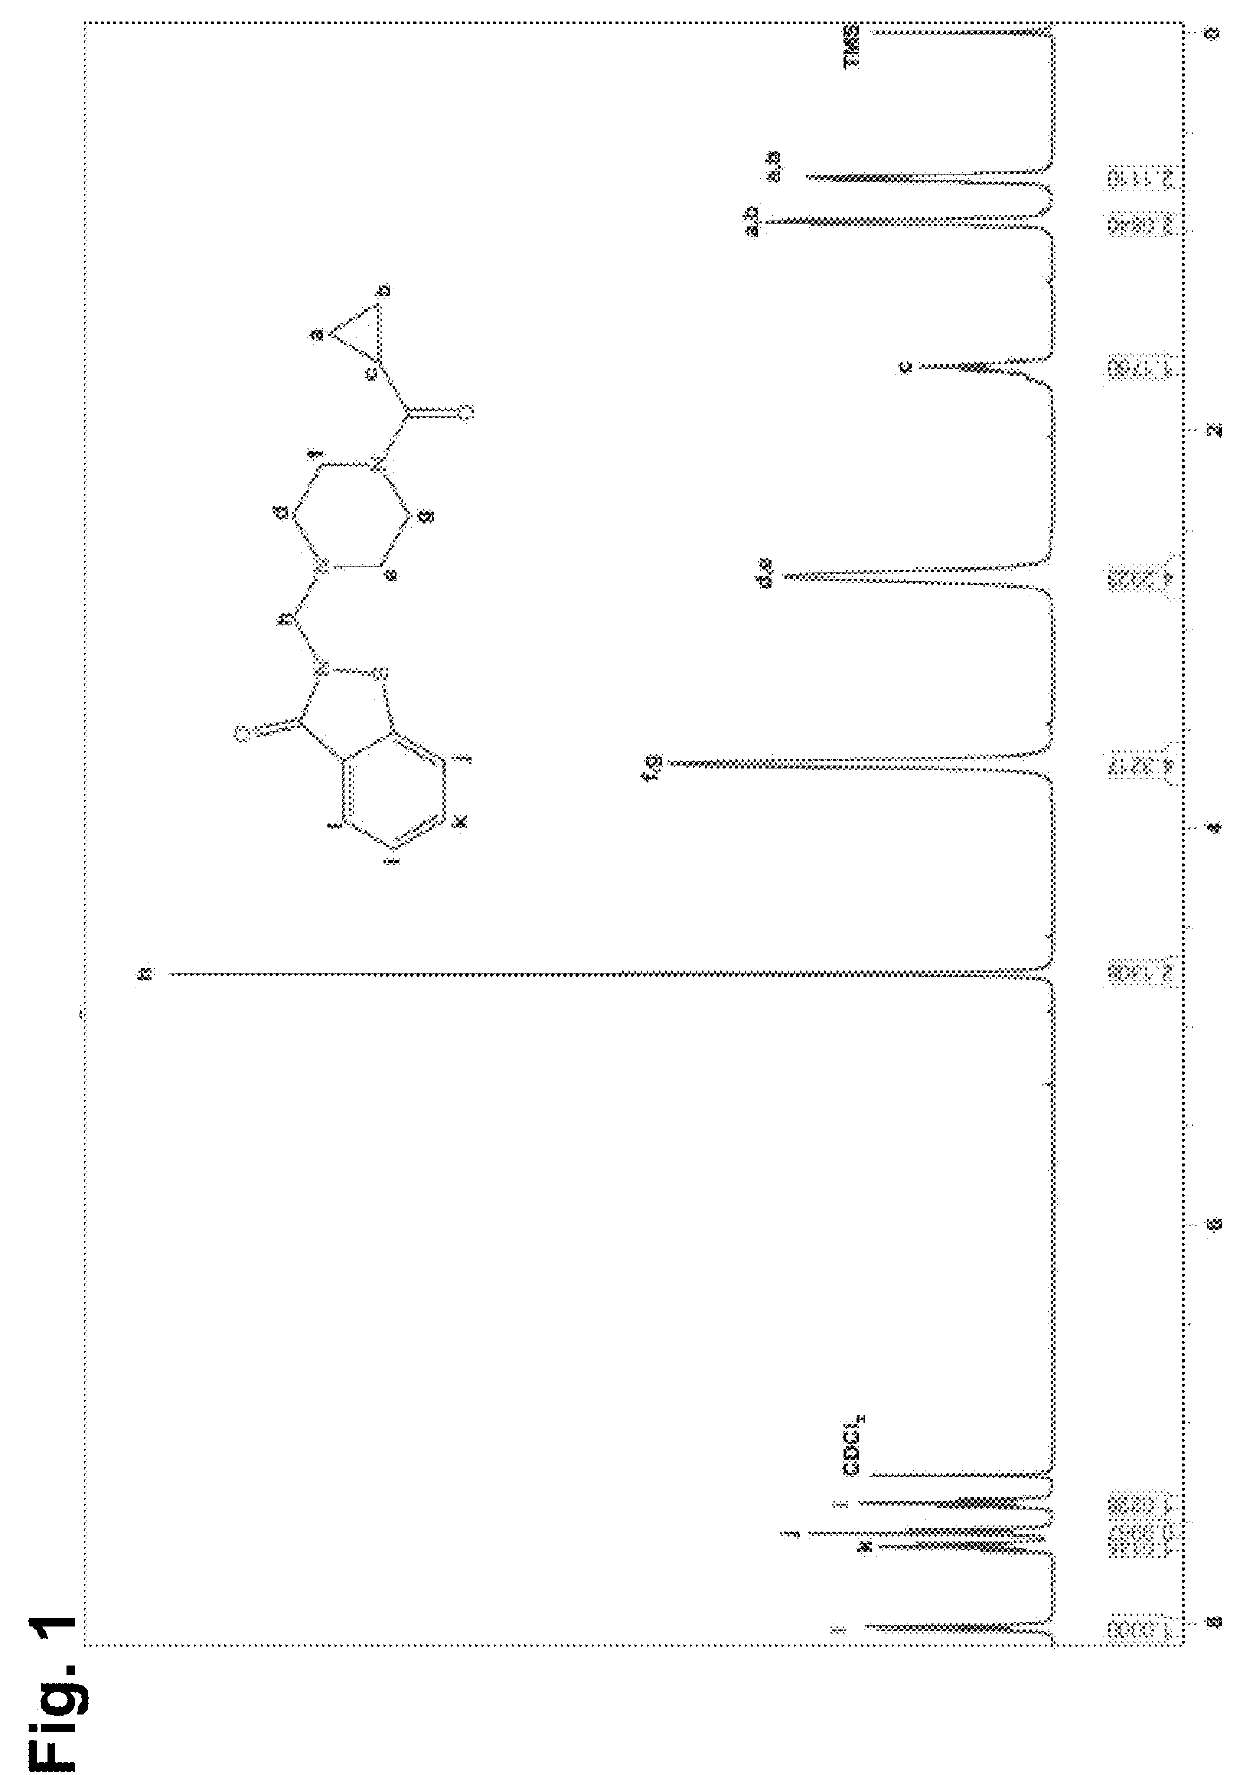 Small molecule oxidizers of pdi and their use